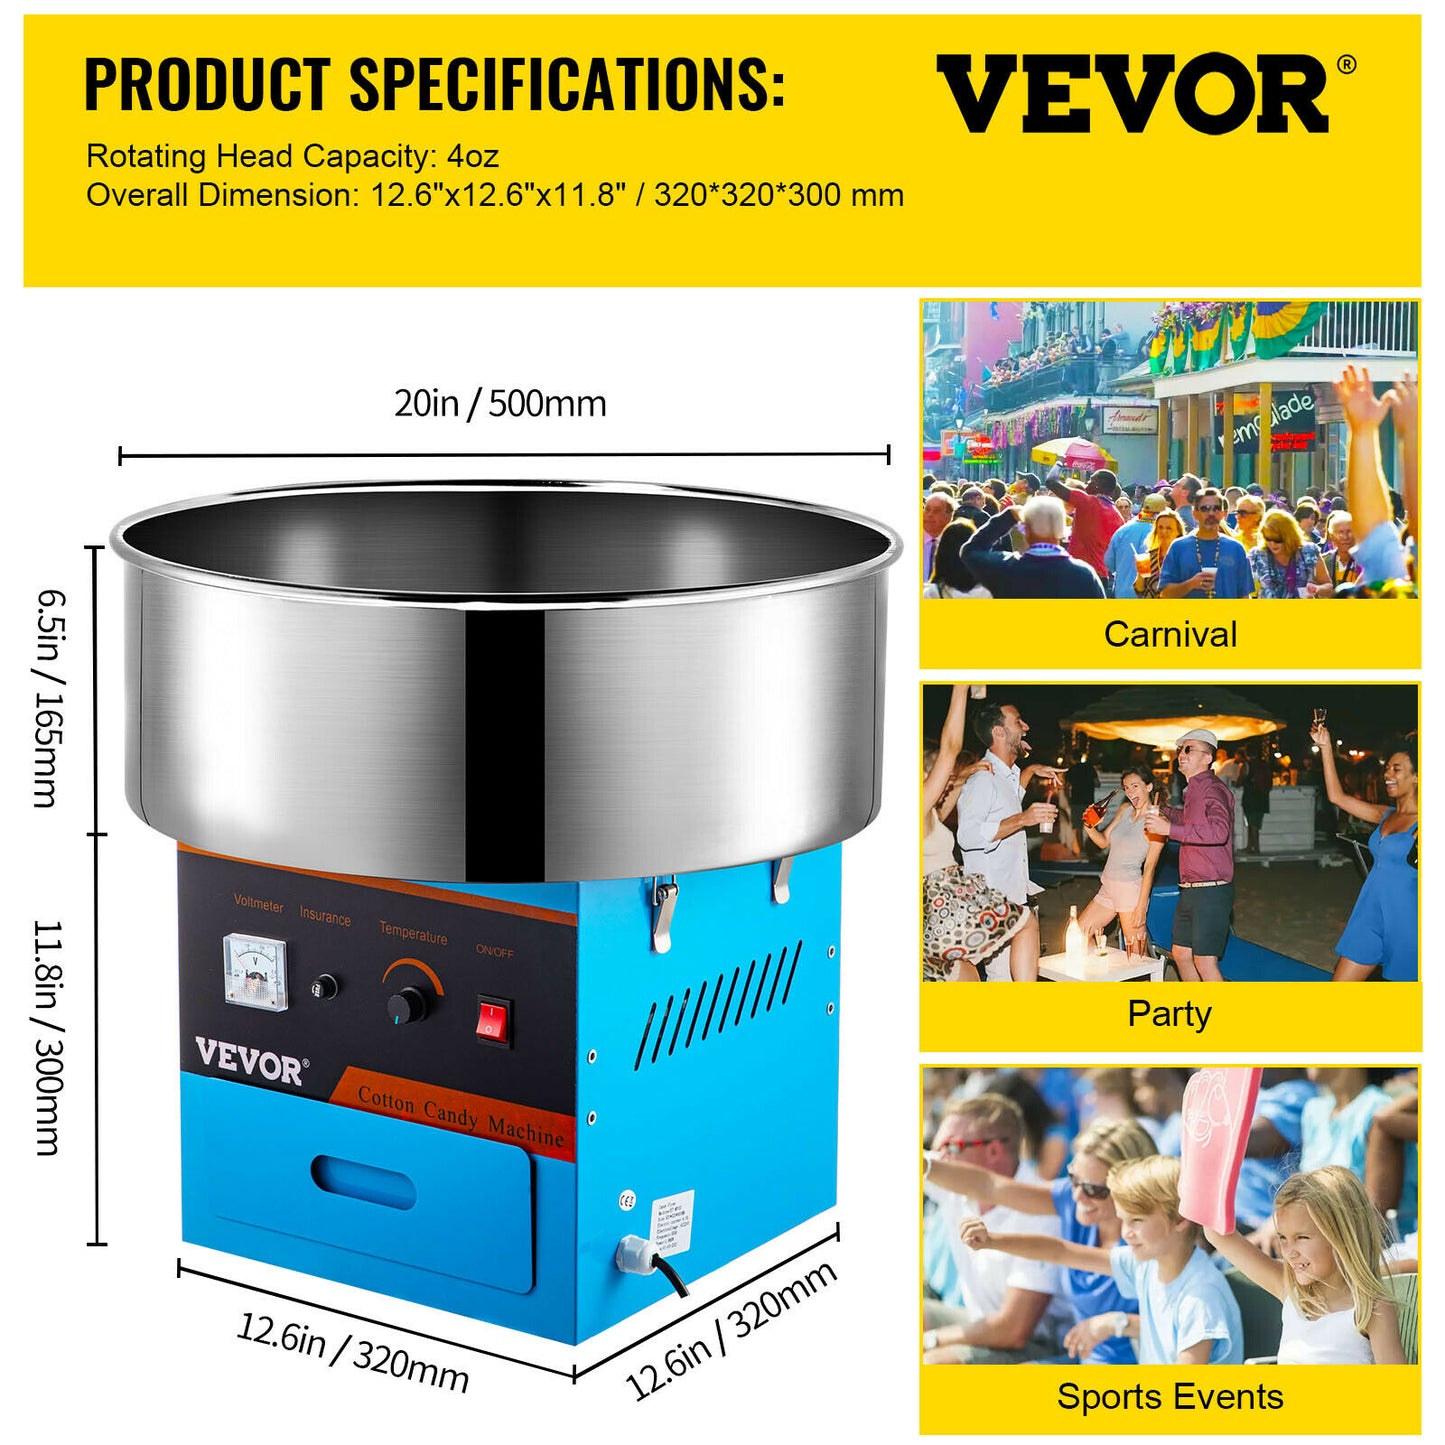 VEVOR Electric Cotton Candy Machine Commercial Sugar Candy Floss Maker Temperature Controls for Party Festival Carnival Home DIY - youronestopstore23